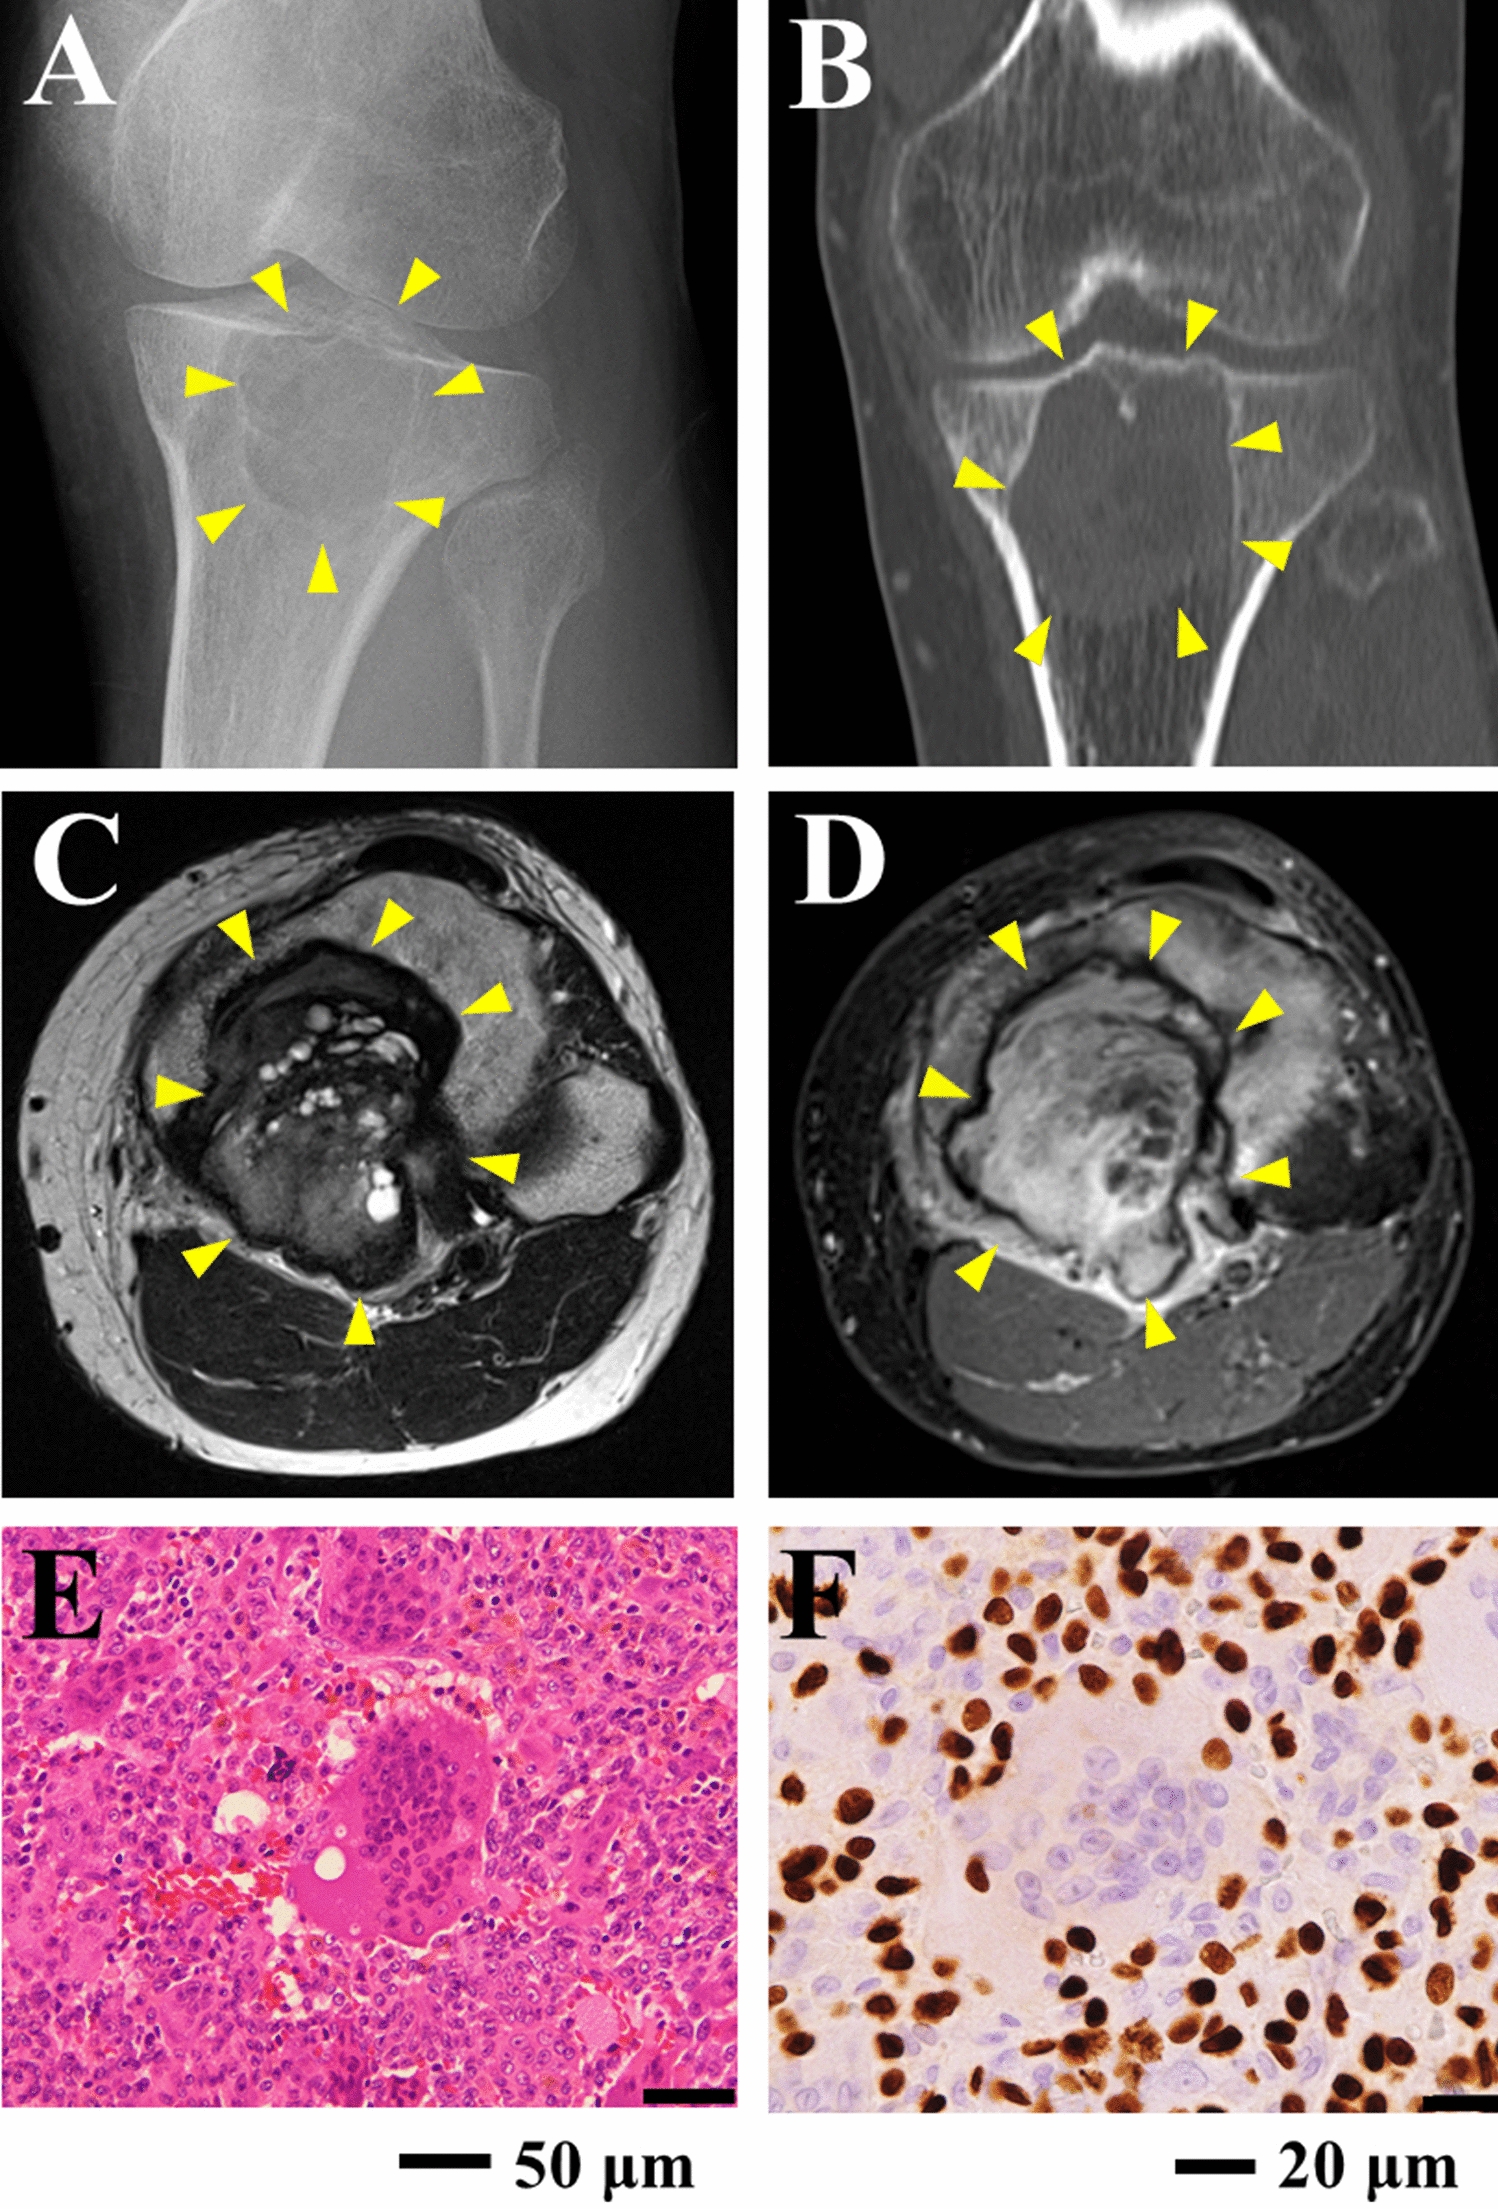 Establishment and characterization of two novel patient-derived cell lines from giant cell tumor of bone: NCC-GCTB8-C1 and NCC-GCTB9-C1